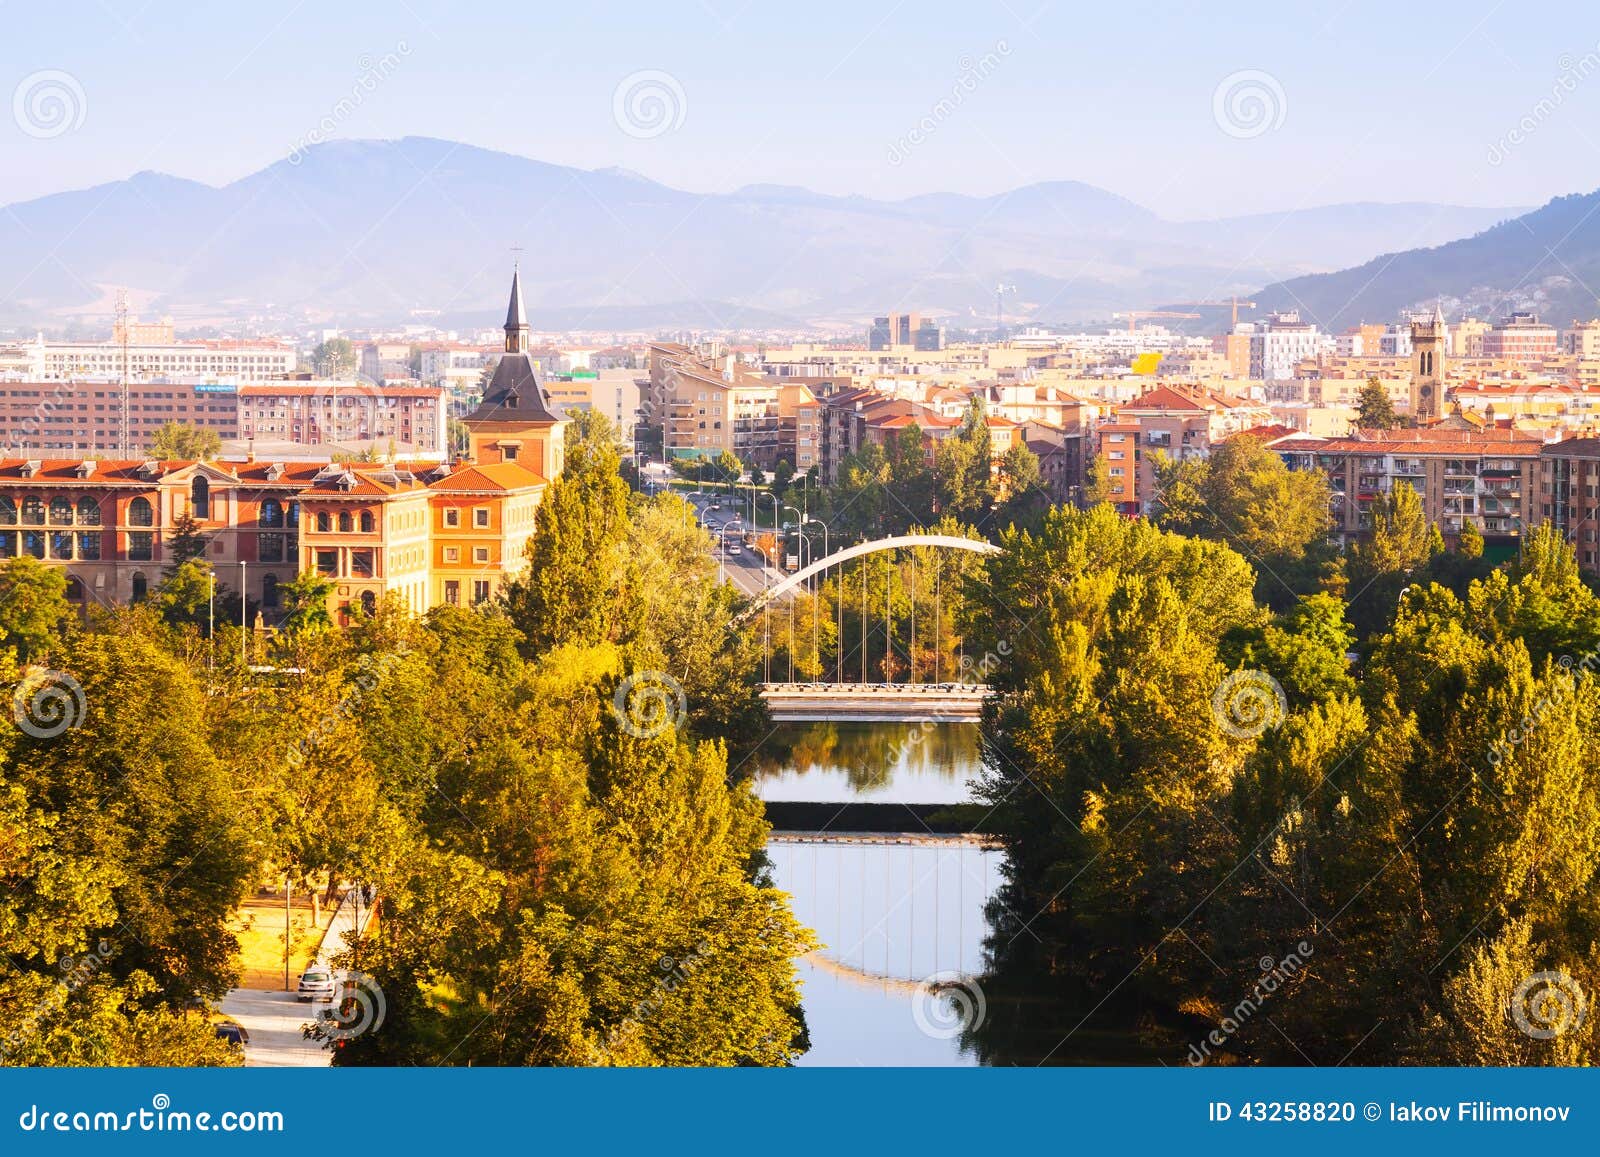 pamplona with bridge over river